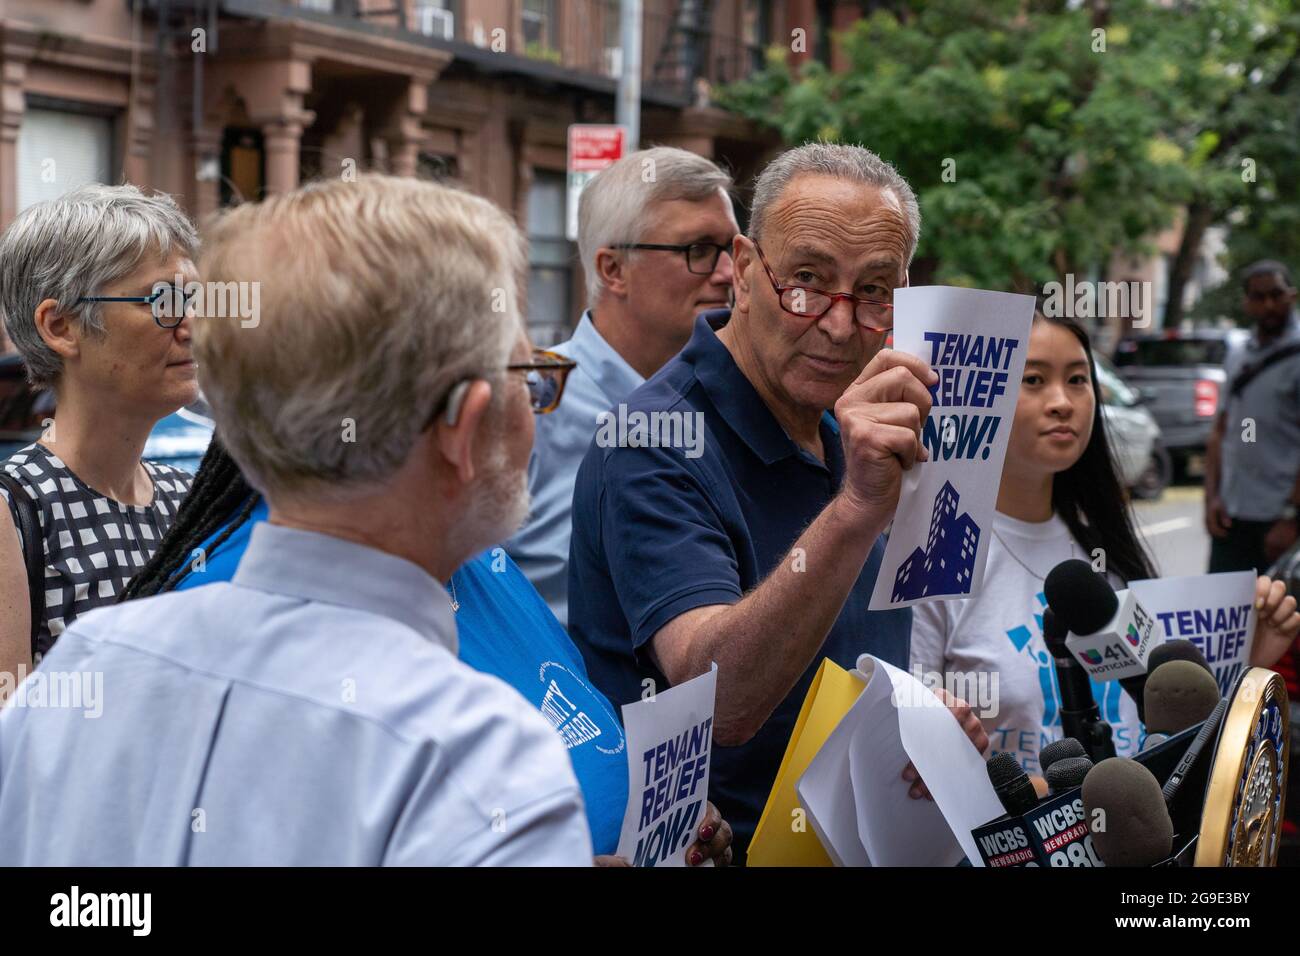 Senate Majority Leader Senator Chuck Schumer (D-NY) speaks at a press conference at Hells Kitchen in New York City.Standing alongside NY State Senator Brian Kavanagh, Assembly Member Richard Gottfried and community rent activists Sen. Chuck Schumer says that the Cuomo administration is failing to disburse the $2.4 billion in rent relief meant for New York that could be lost at the end of September if state doesn't release the money to needy tenants who were hit hard during the covid-19 pandemic. (Photo by Ron Adar/SOPA Images/Sipa USA) Stock Photo